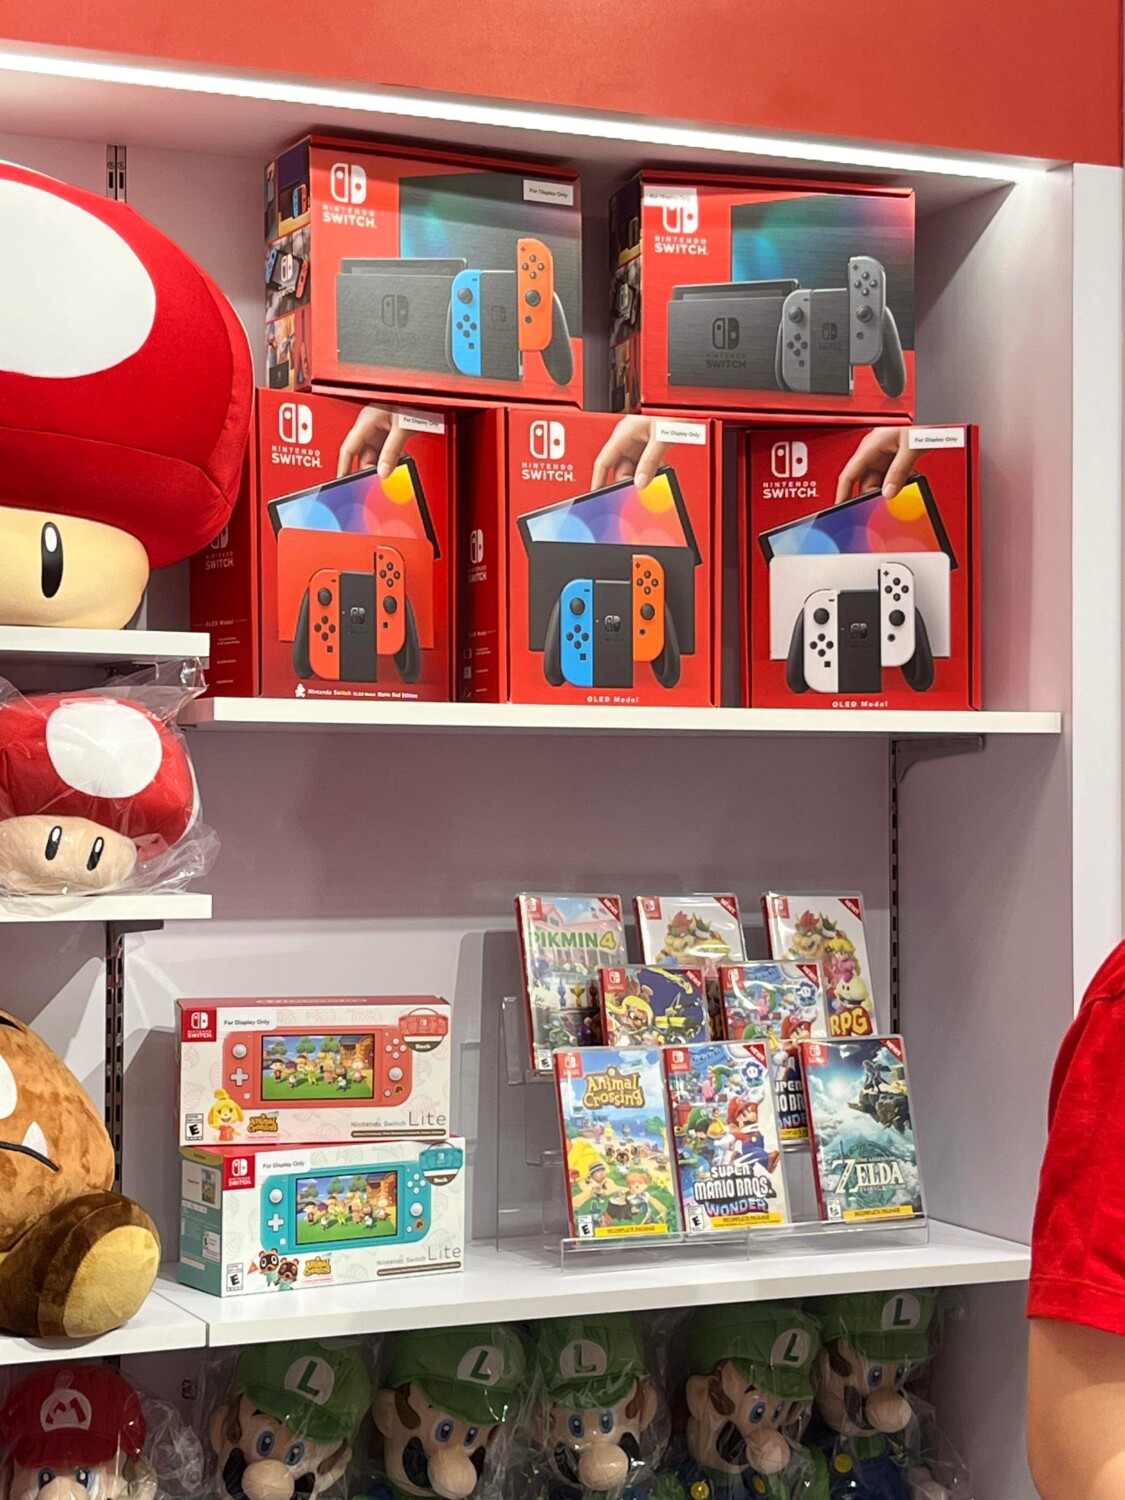 First Early Photos of Nintendo POP-UP STORE In Singapore – NintendoSoup